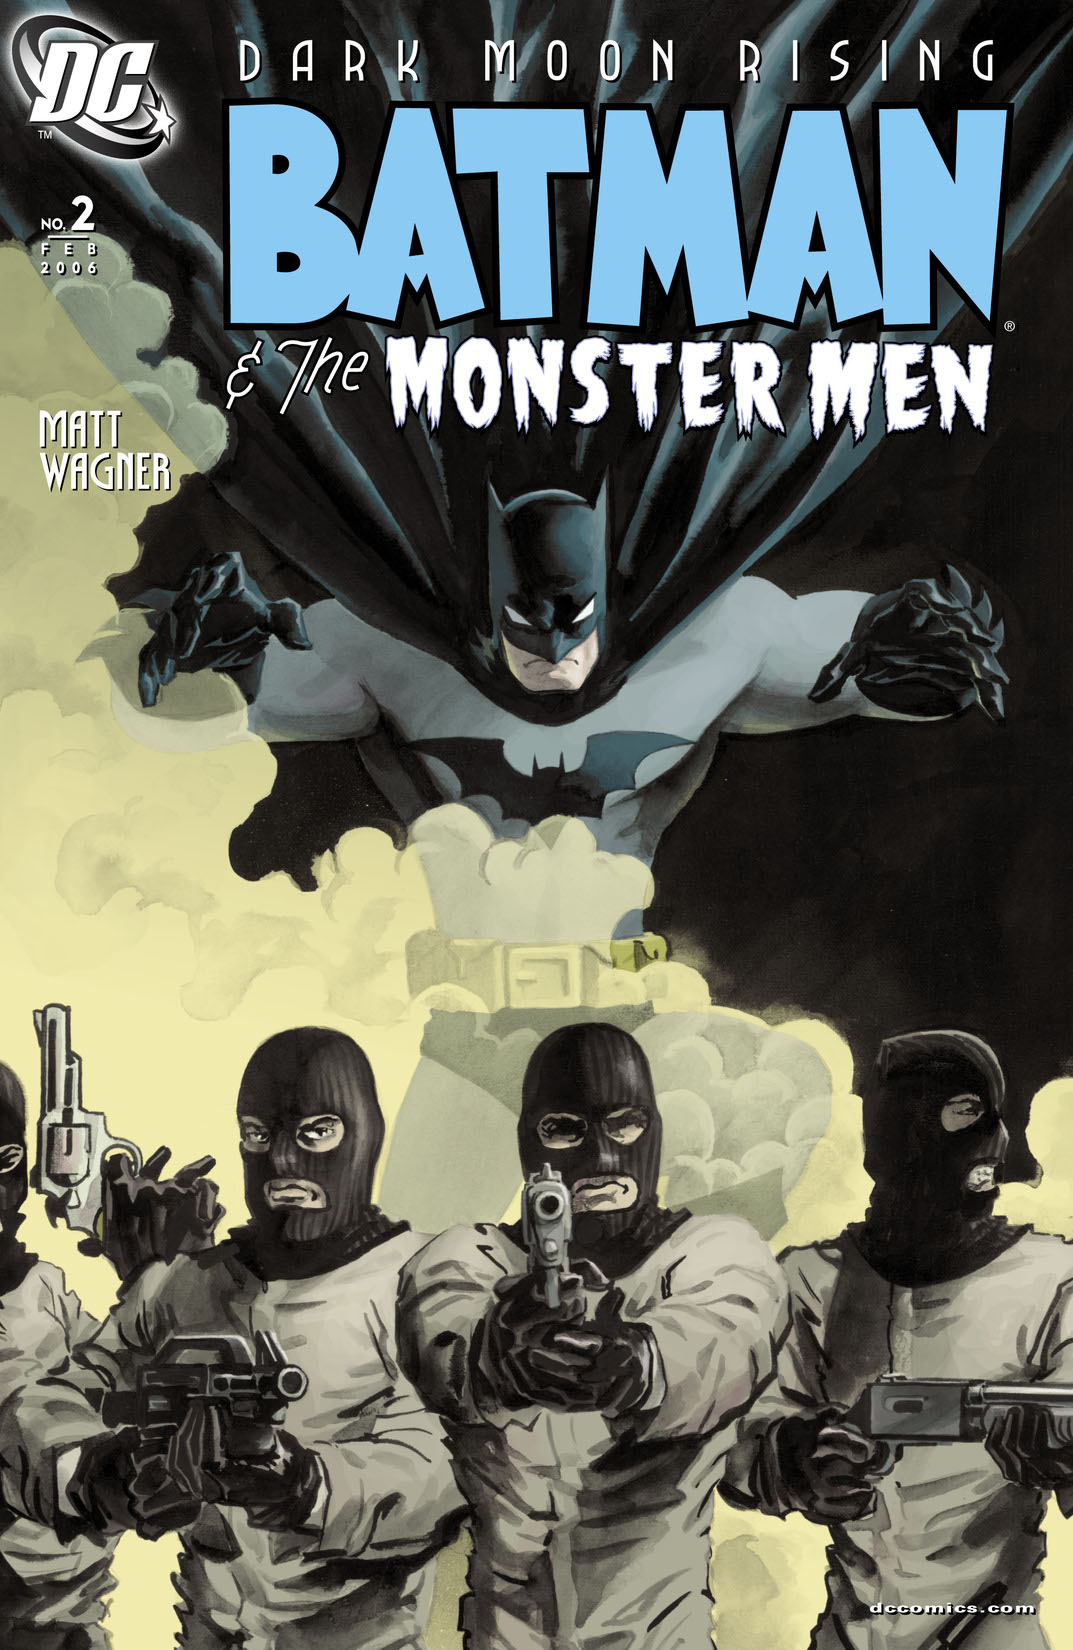 Batman and the Monster Men #2 preview images